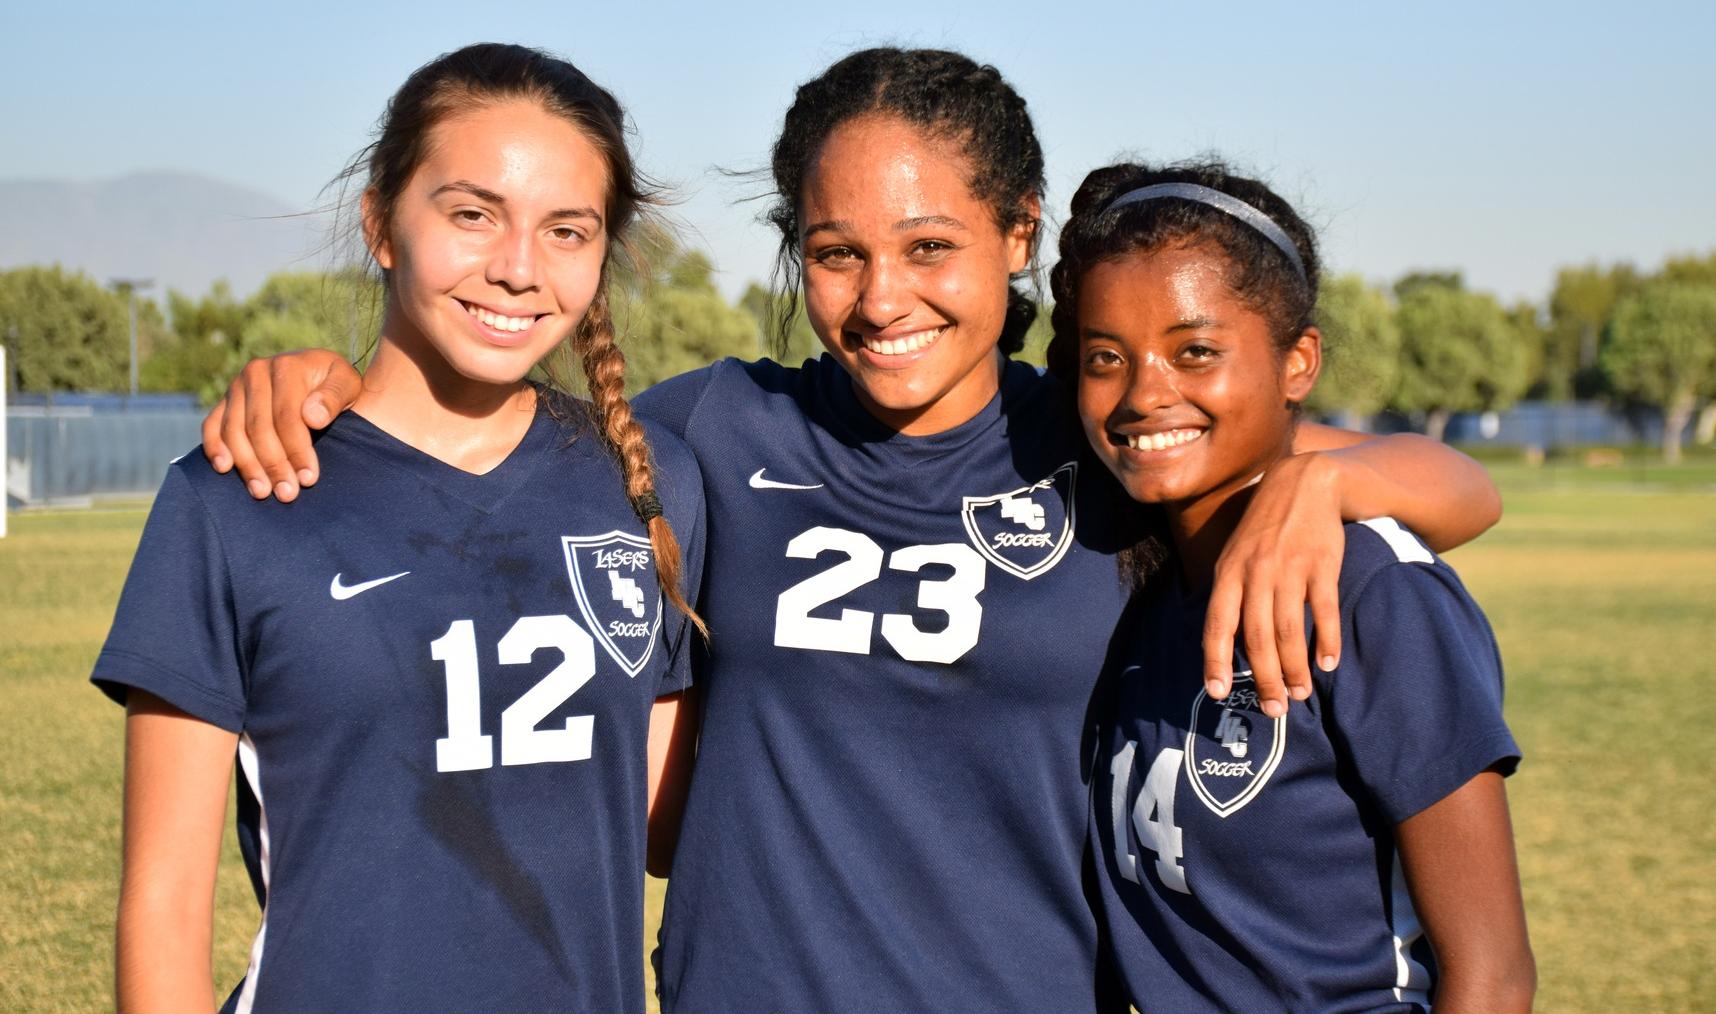 Women's soccer team wins second straight, shuts out Norco